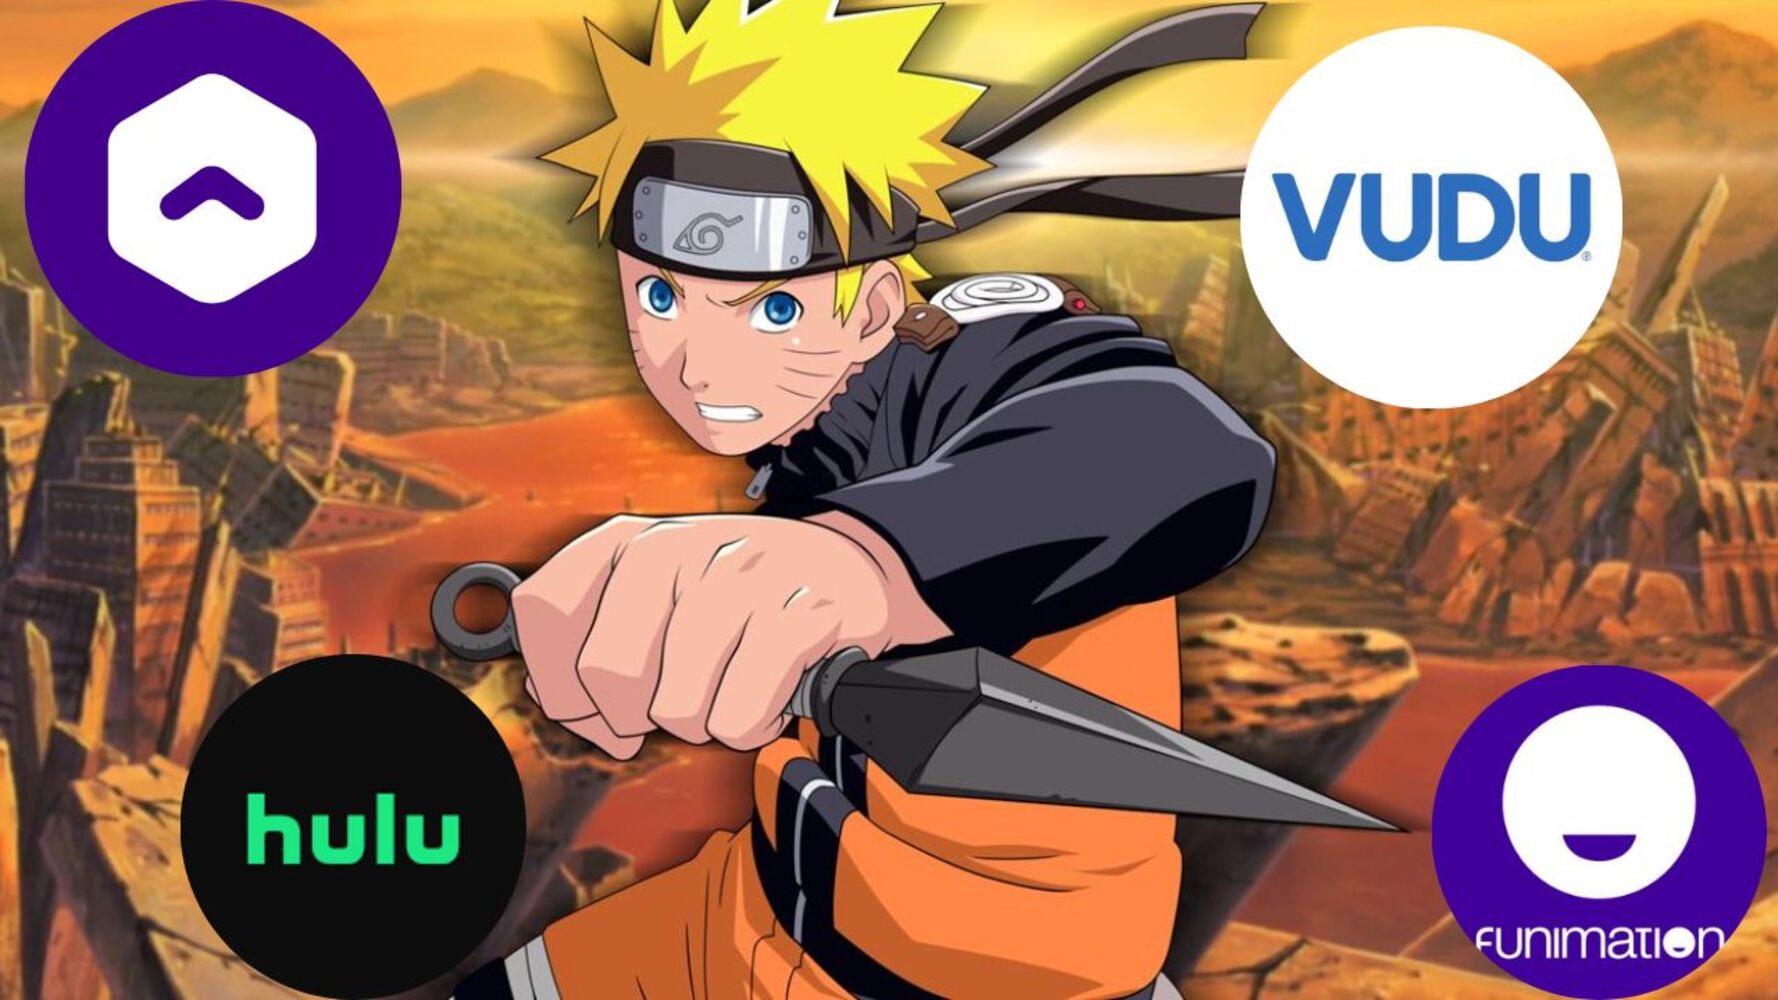 Where to Watch Naruto Dubbed